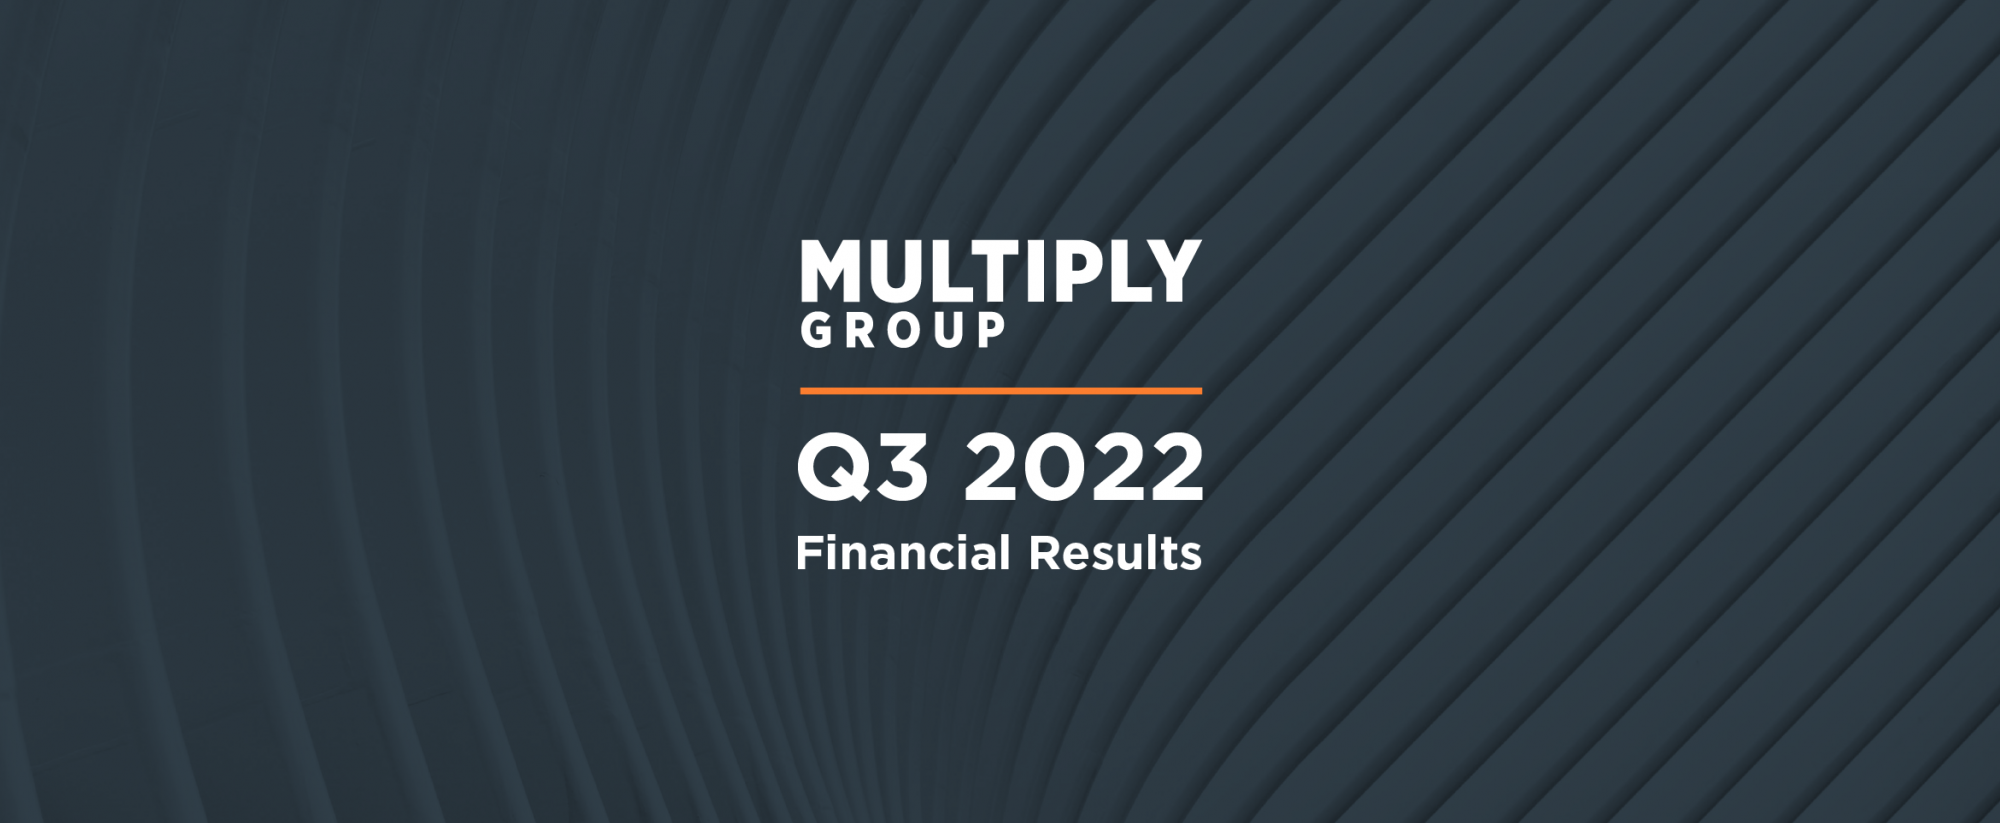 Multiply Group reports net profit leap to AED 9.29 billion in Q3 2022